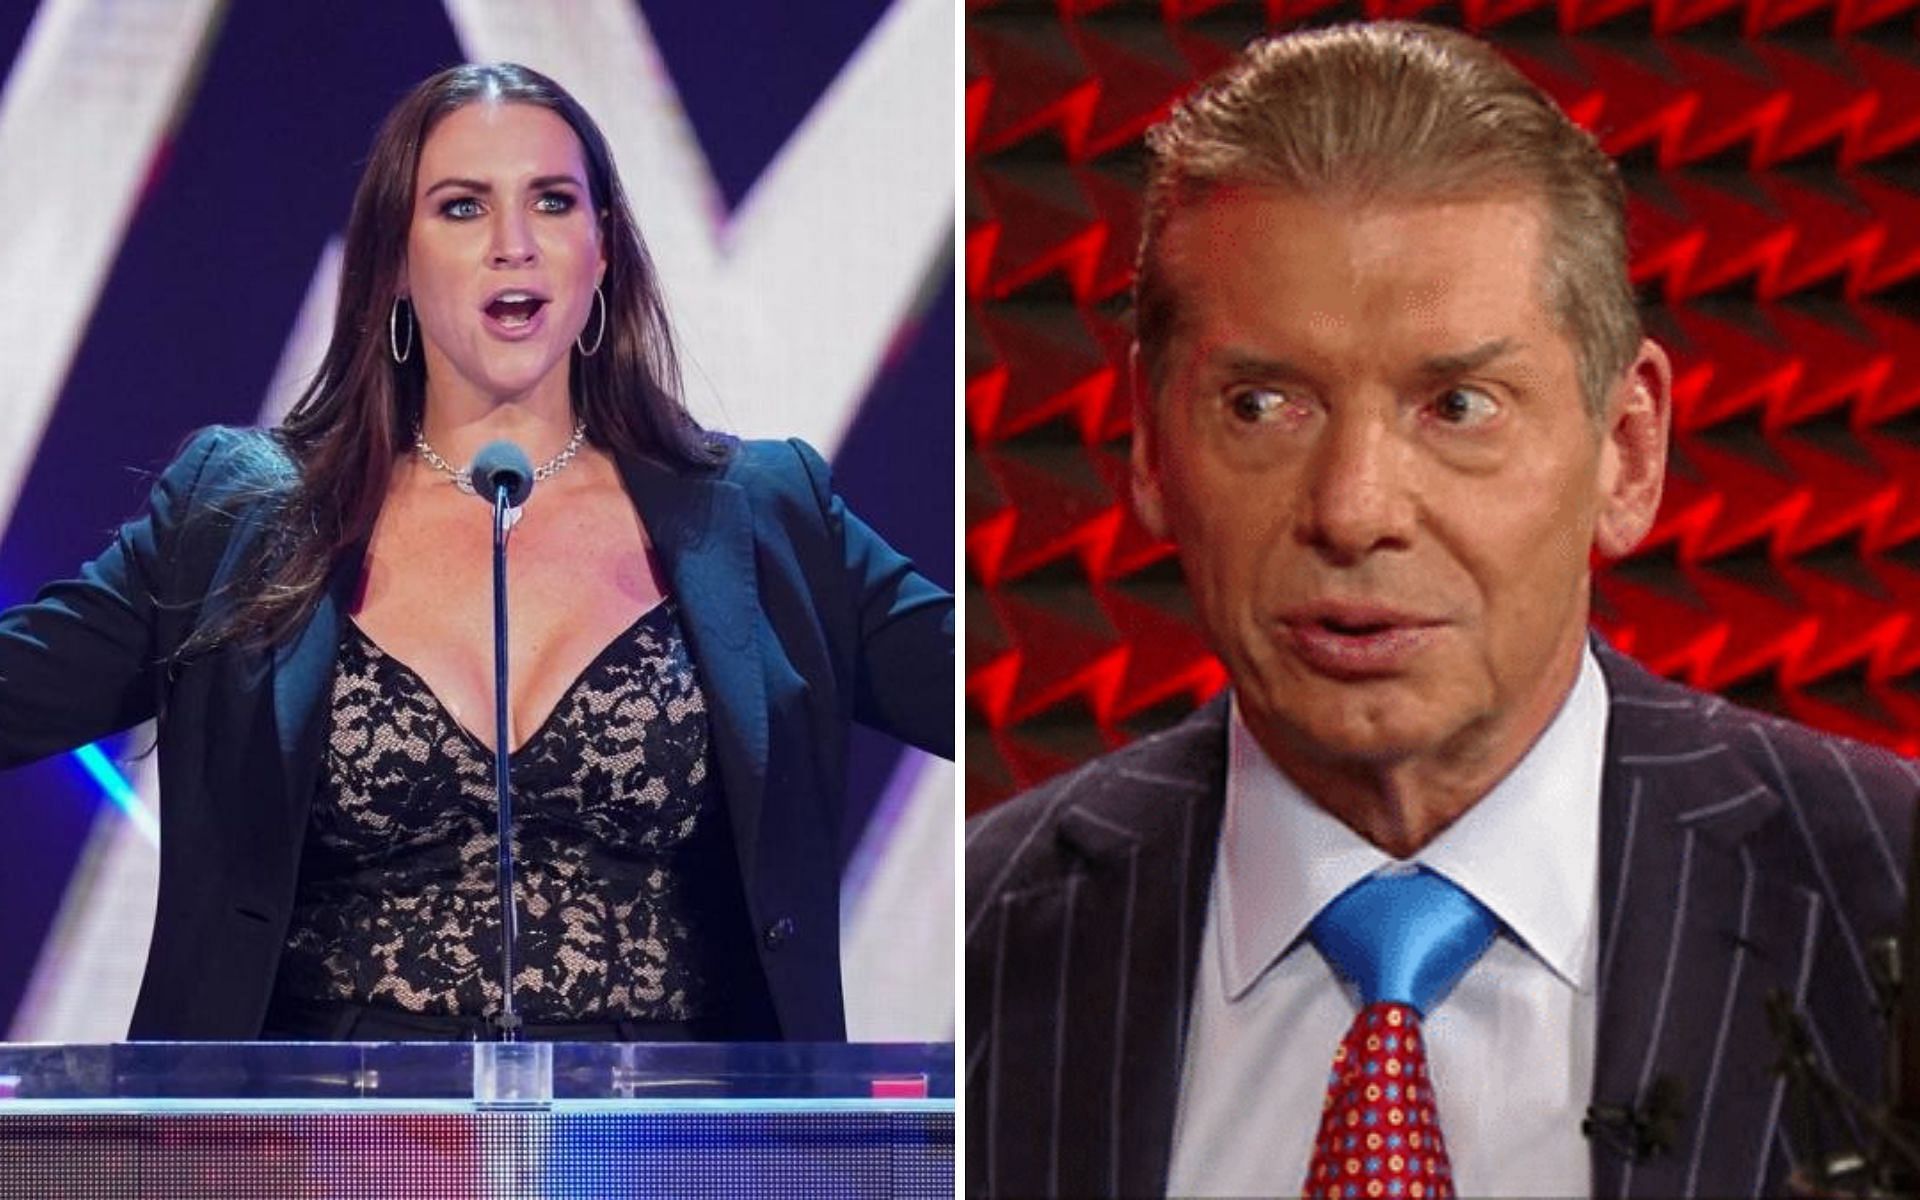 Stephanie will take over from Vince McMahon as the interim CEO and Chairwoman of WWE!